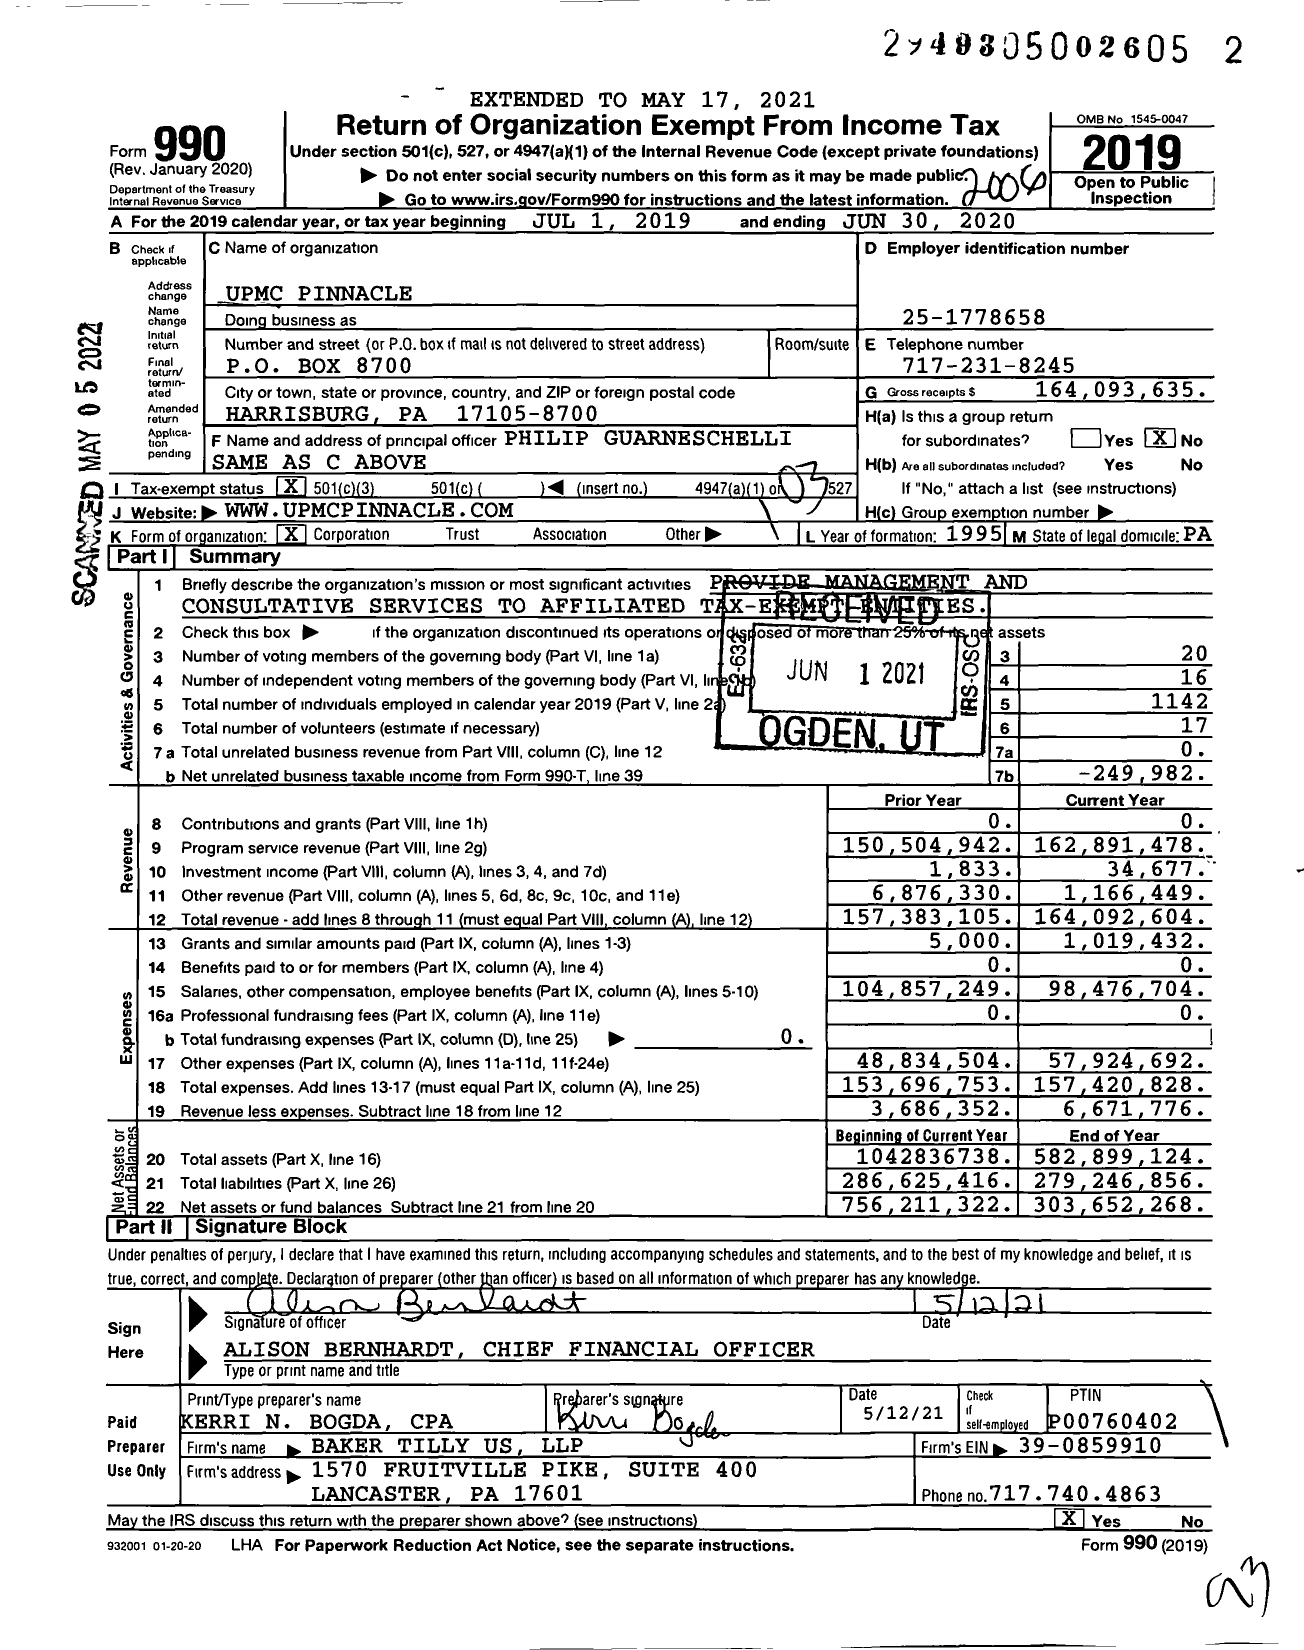 Image of first page of 2019 Form 990 for Upmc Pinnacle